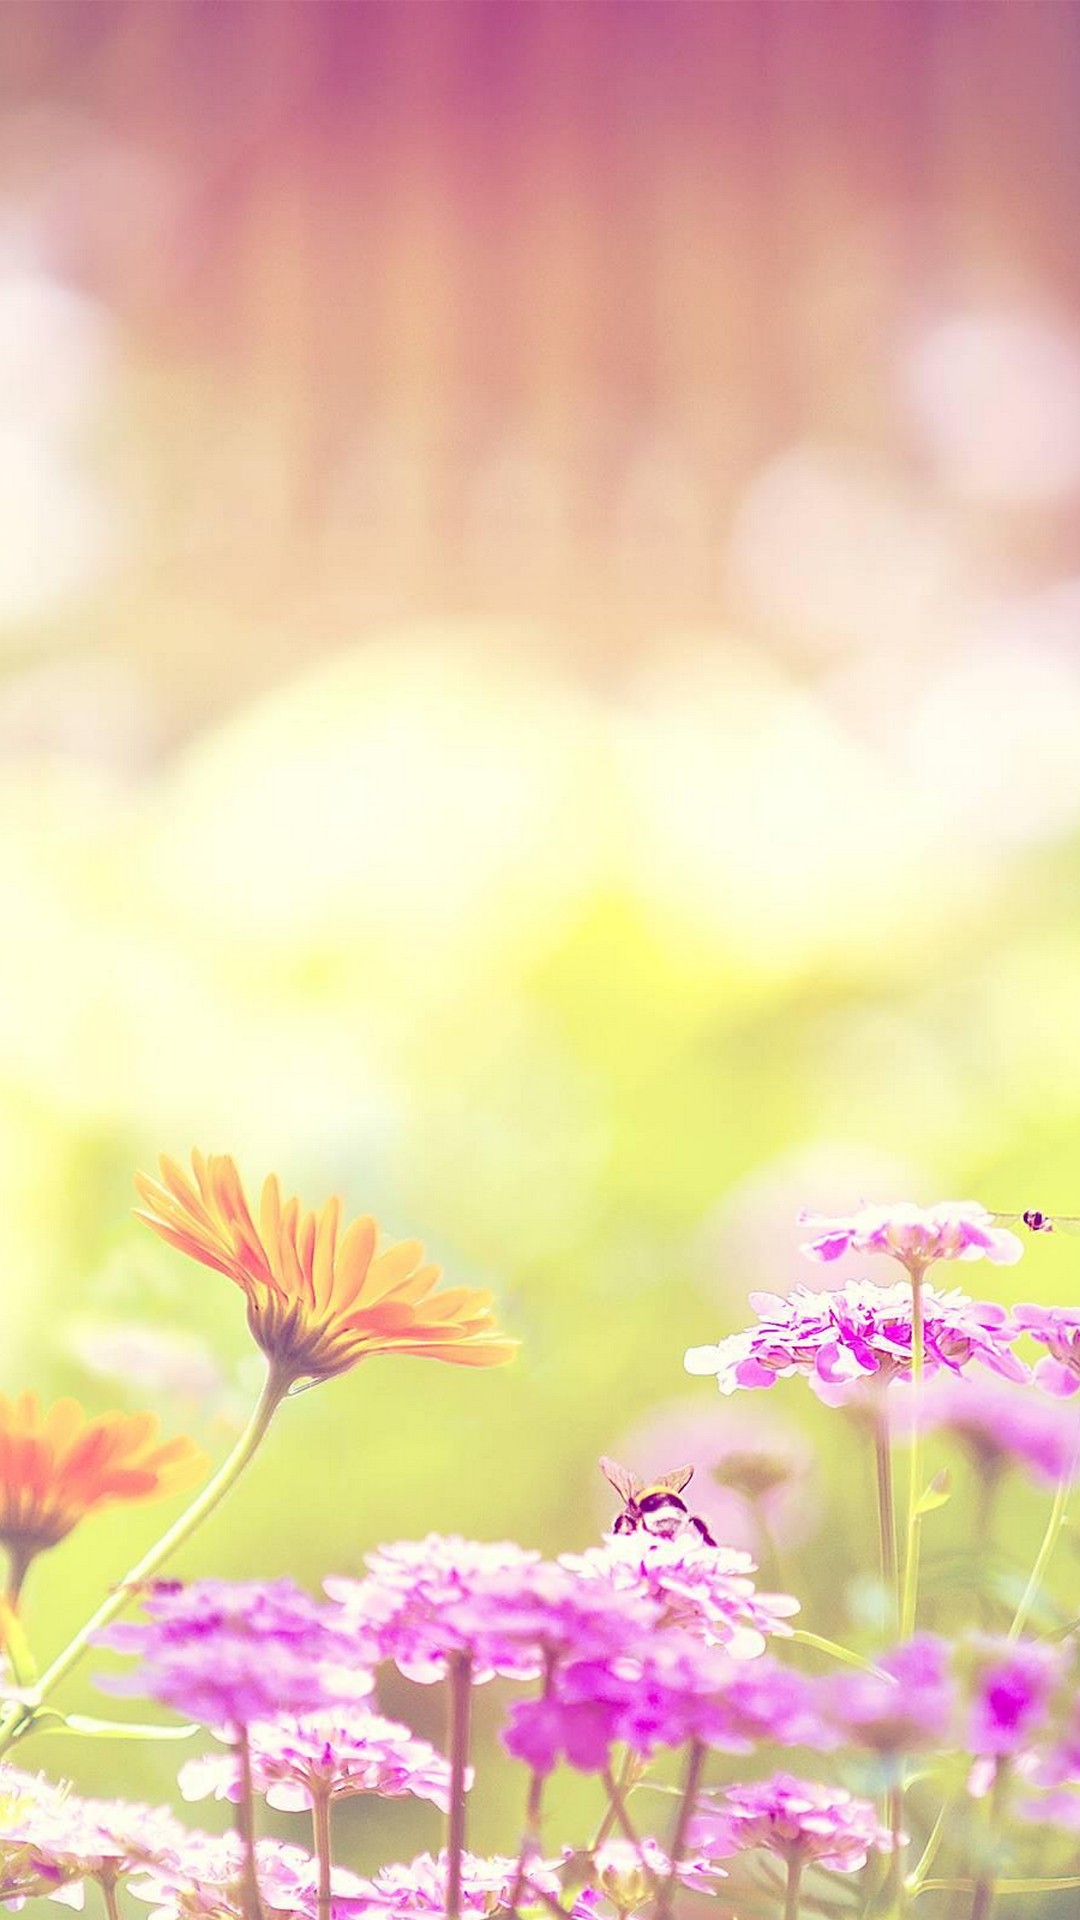 Spring Zen Free Live Wallpaper Available In The Android Market   TalkAndroidcom